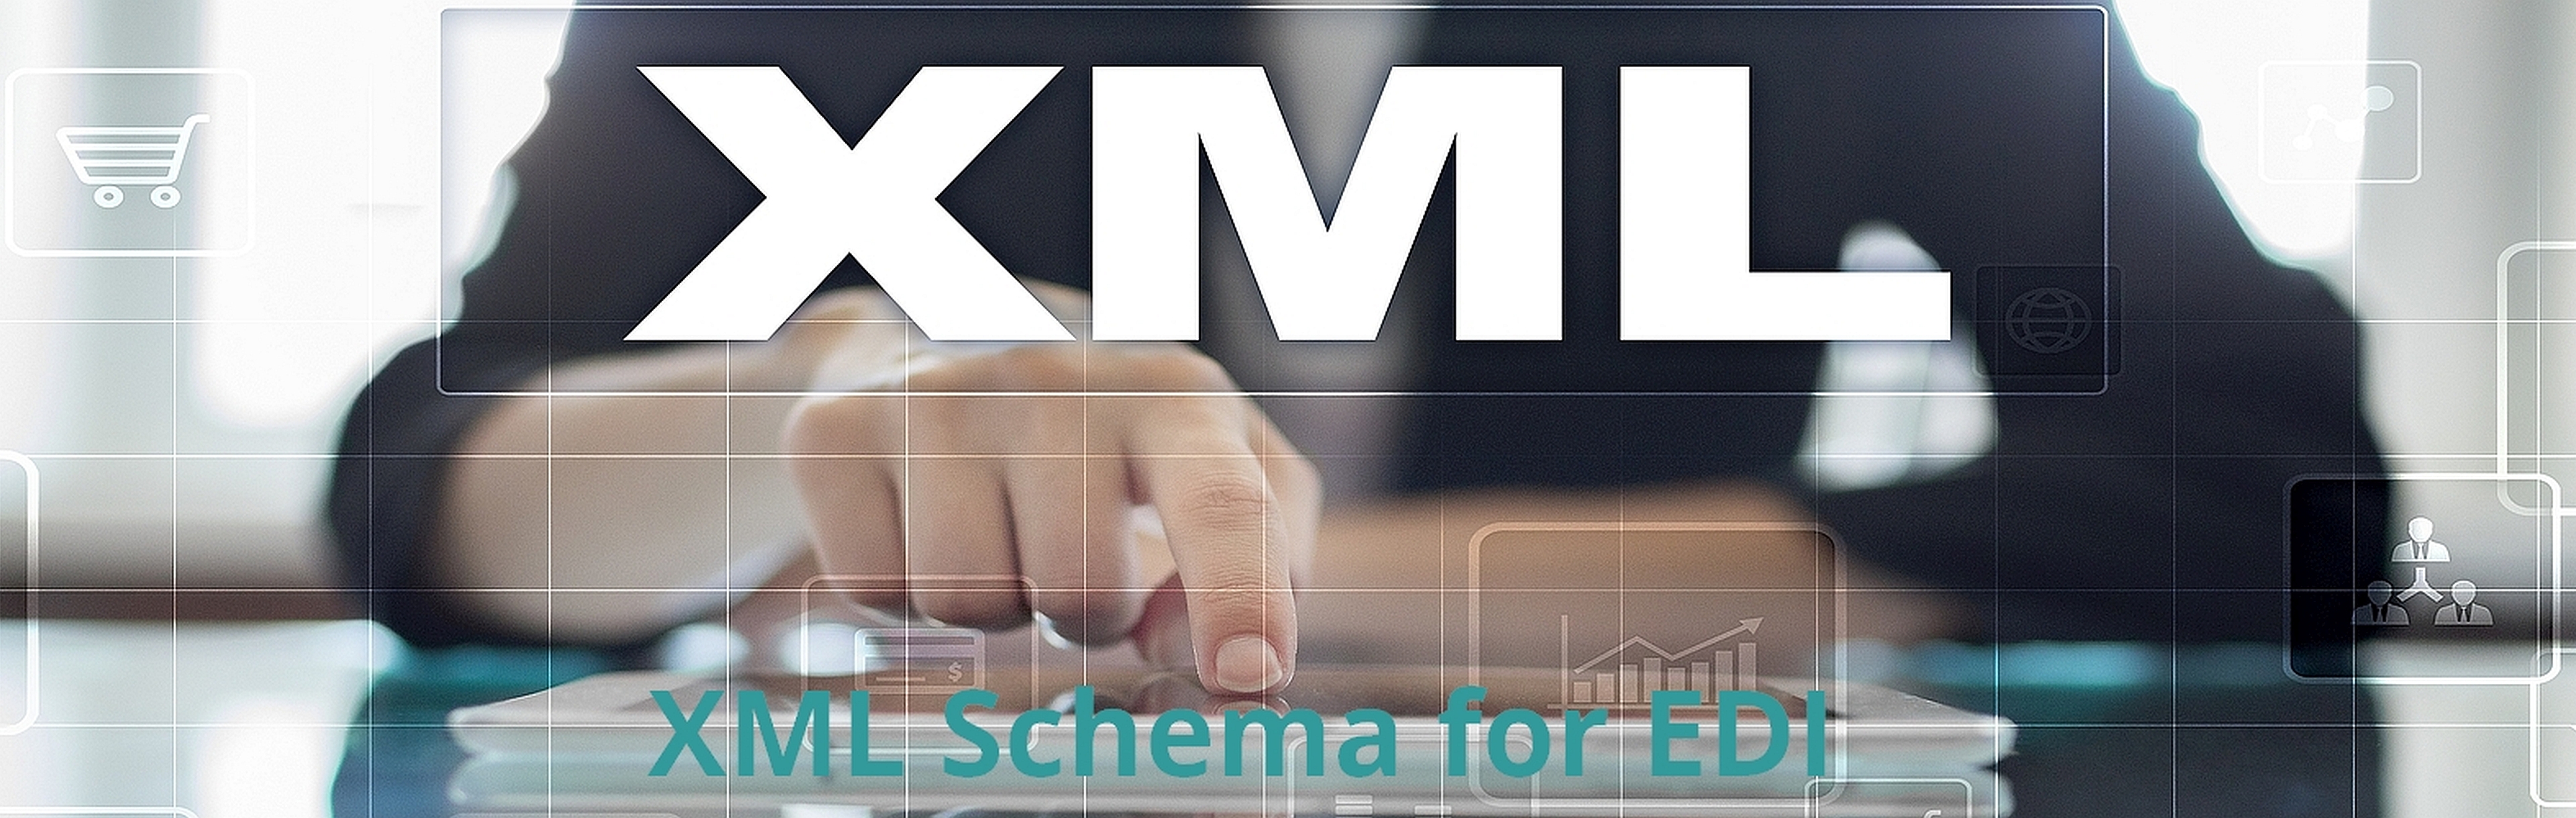 The image shows a man pointing his index finger at a tablet and the text XML Schema for EDI.